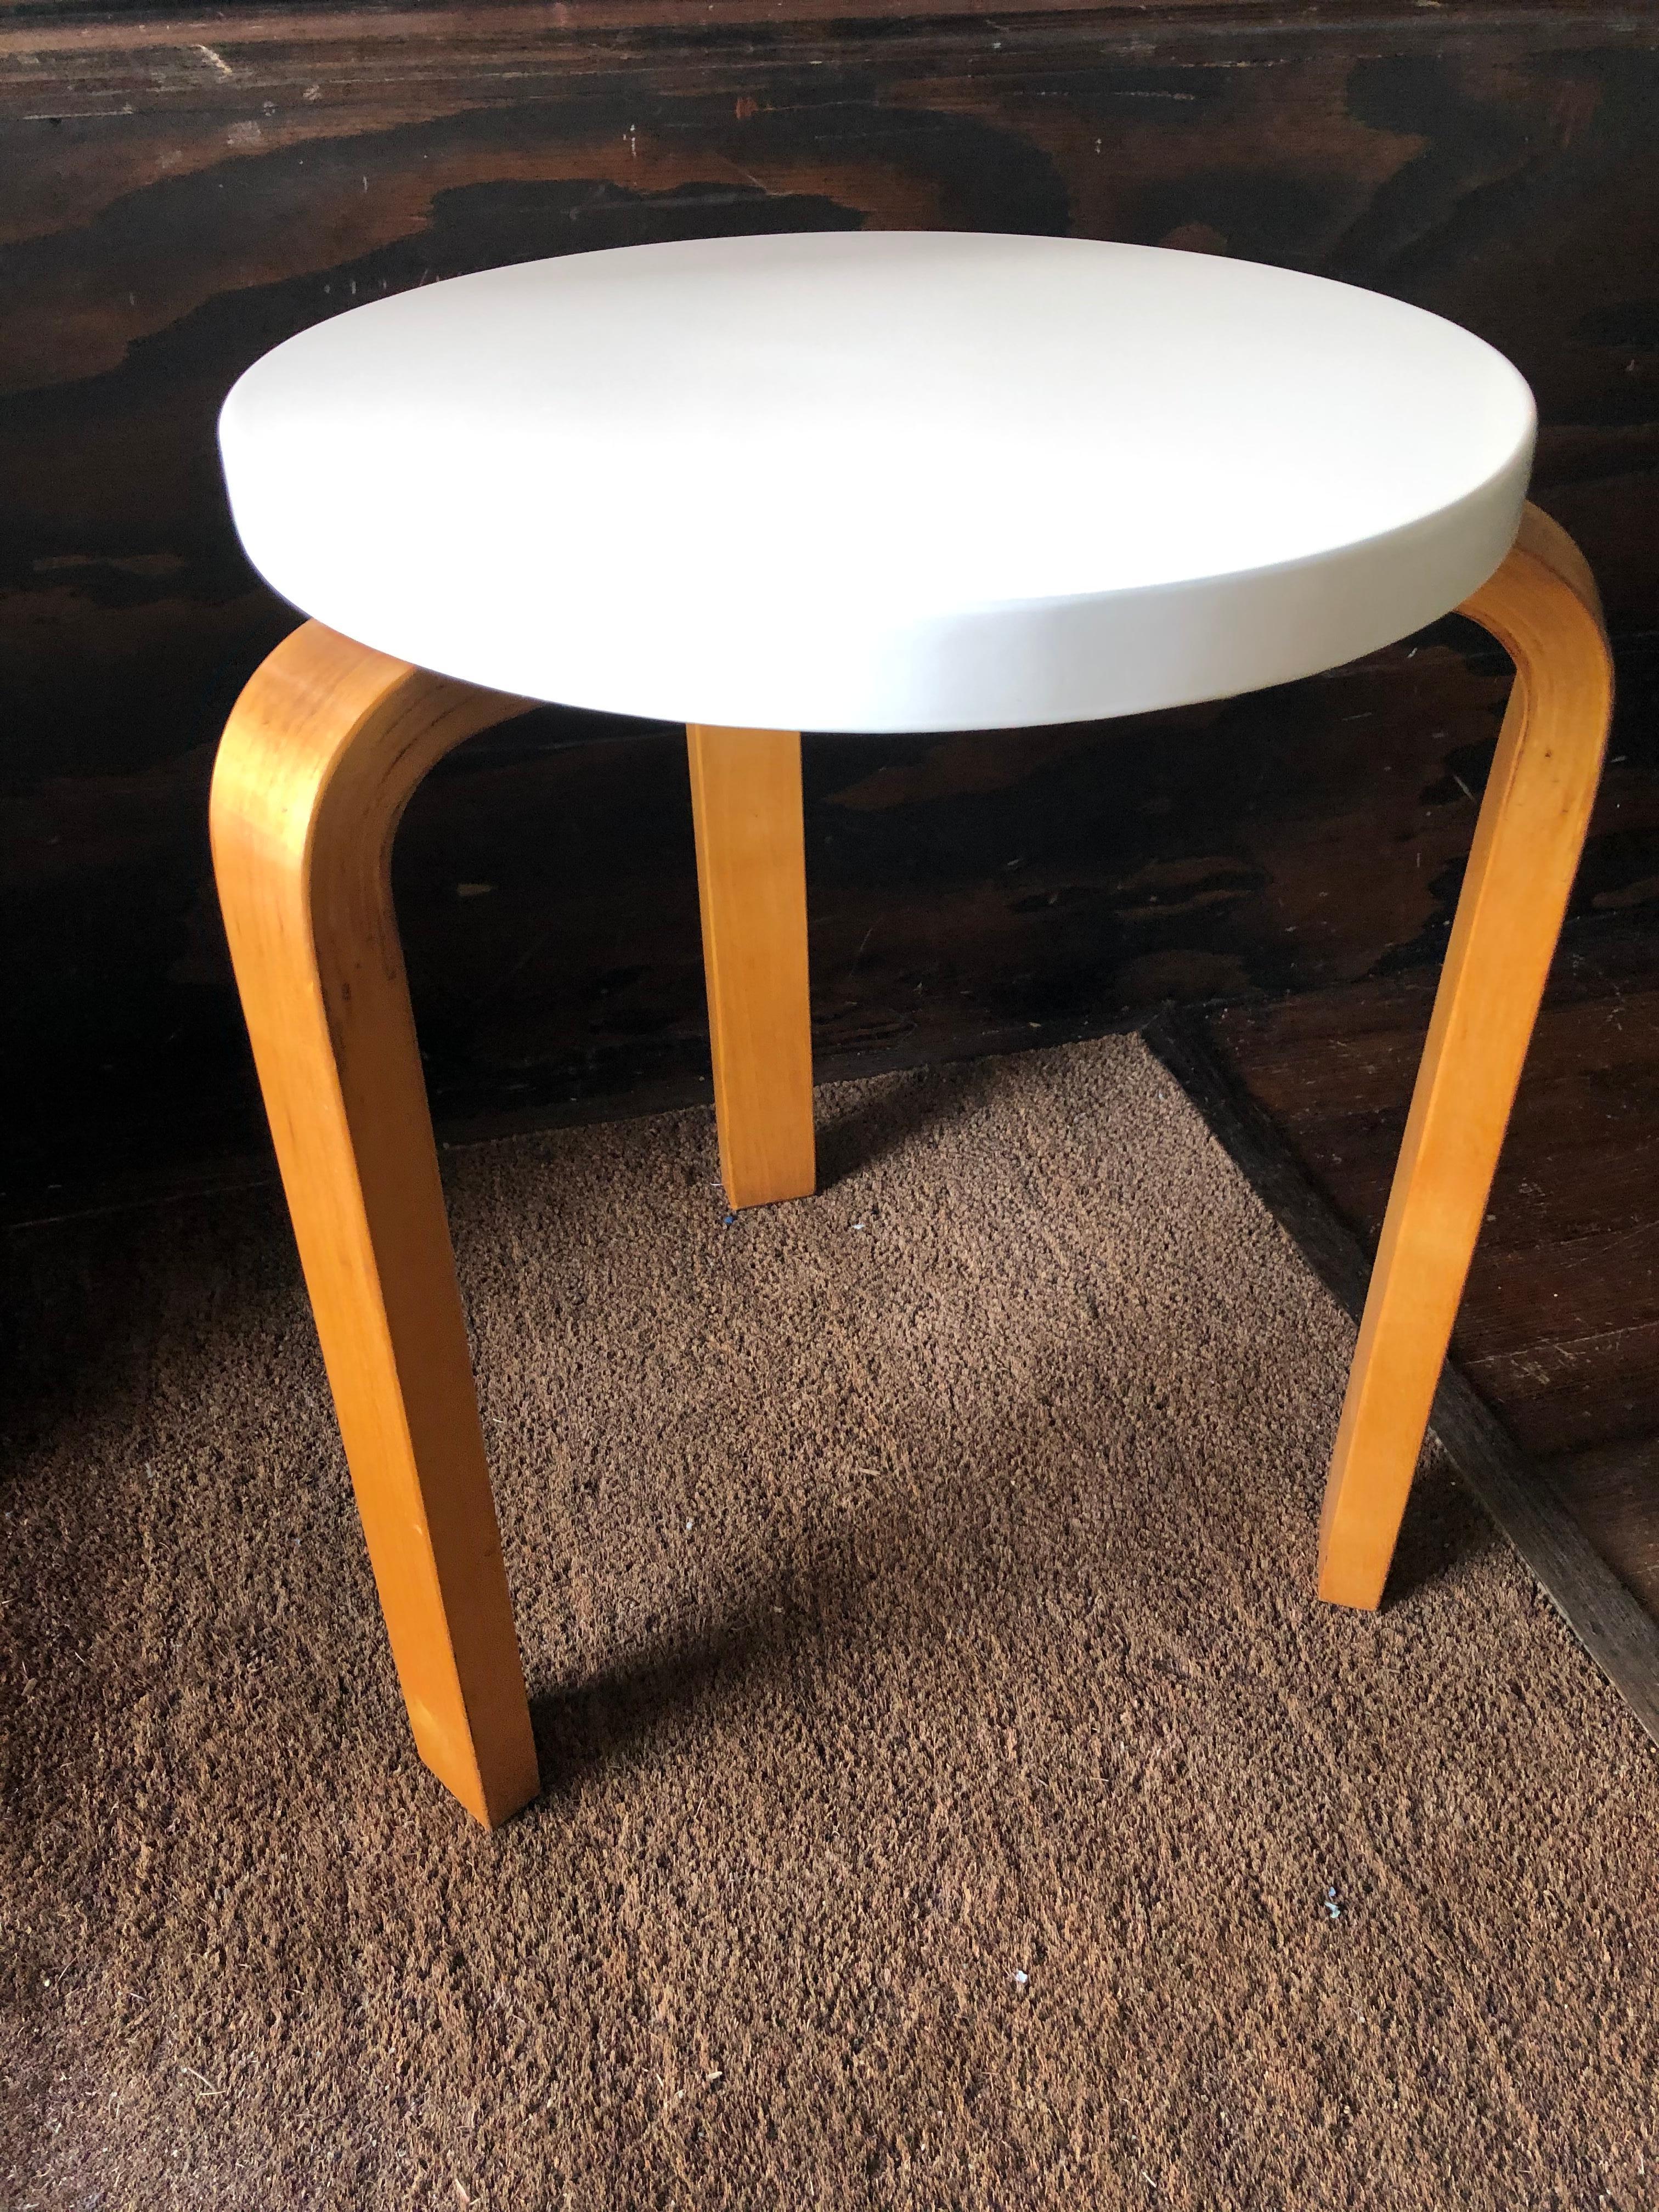 Alvar Aalto early bottom stamped Finsven manufactured between 1930-1950s in Sweden then imported to Madison Ave, top restored off white lacquer.